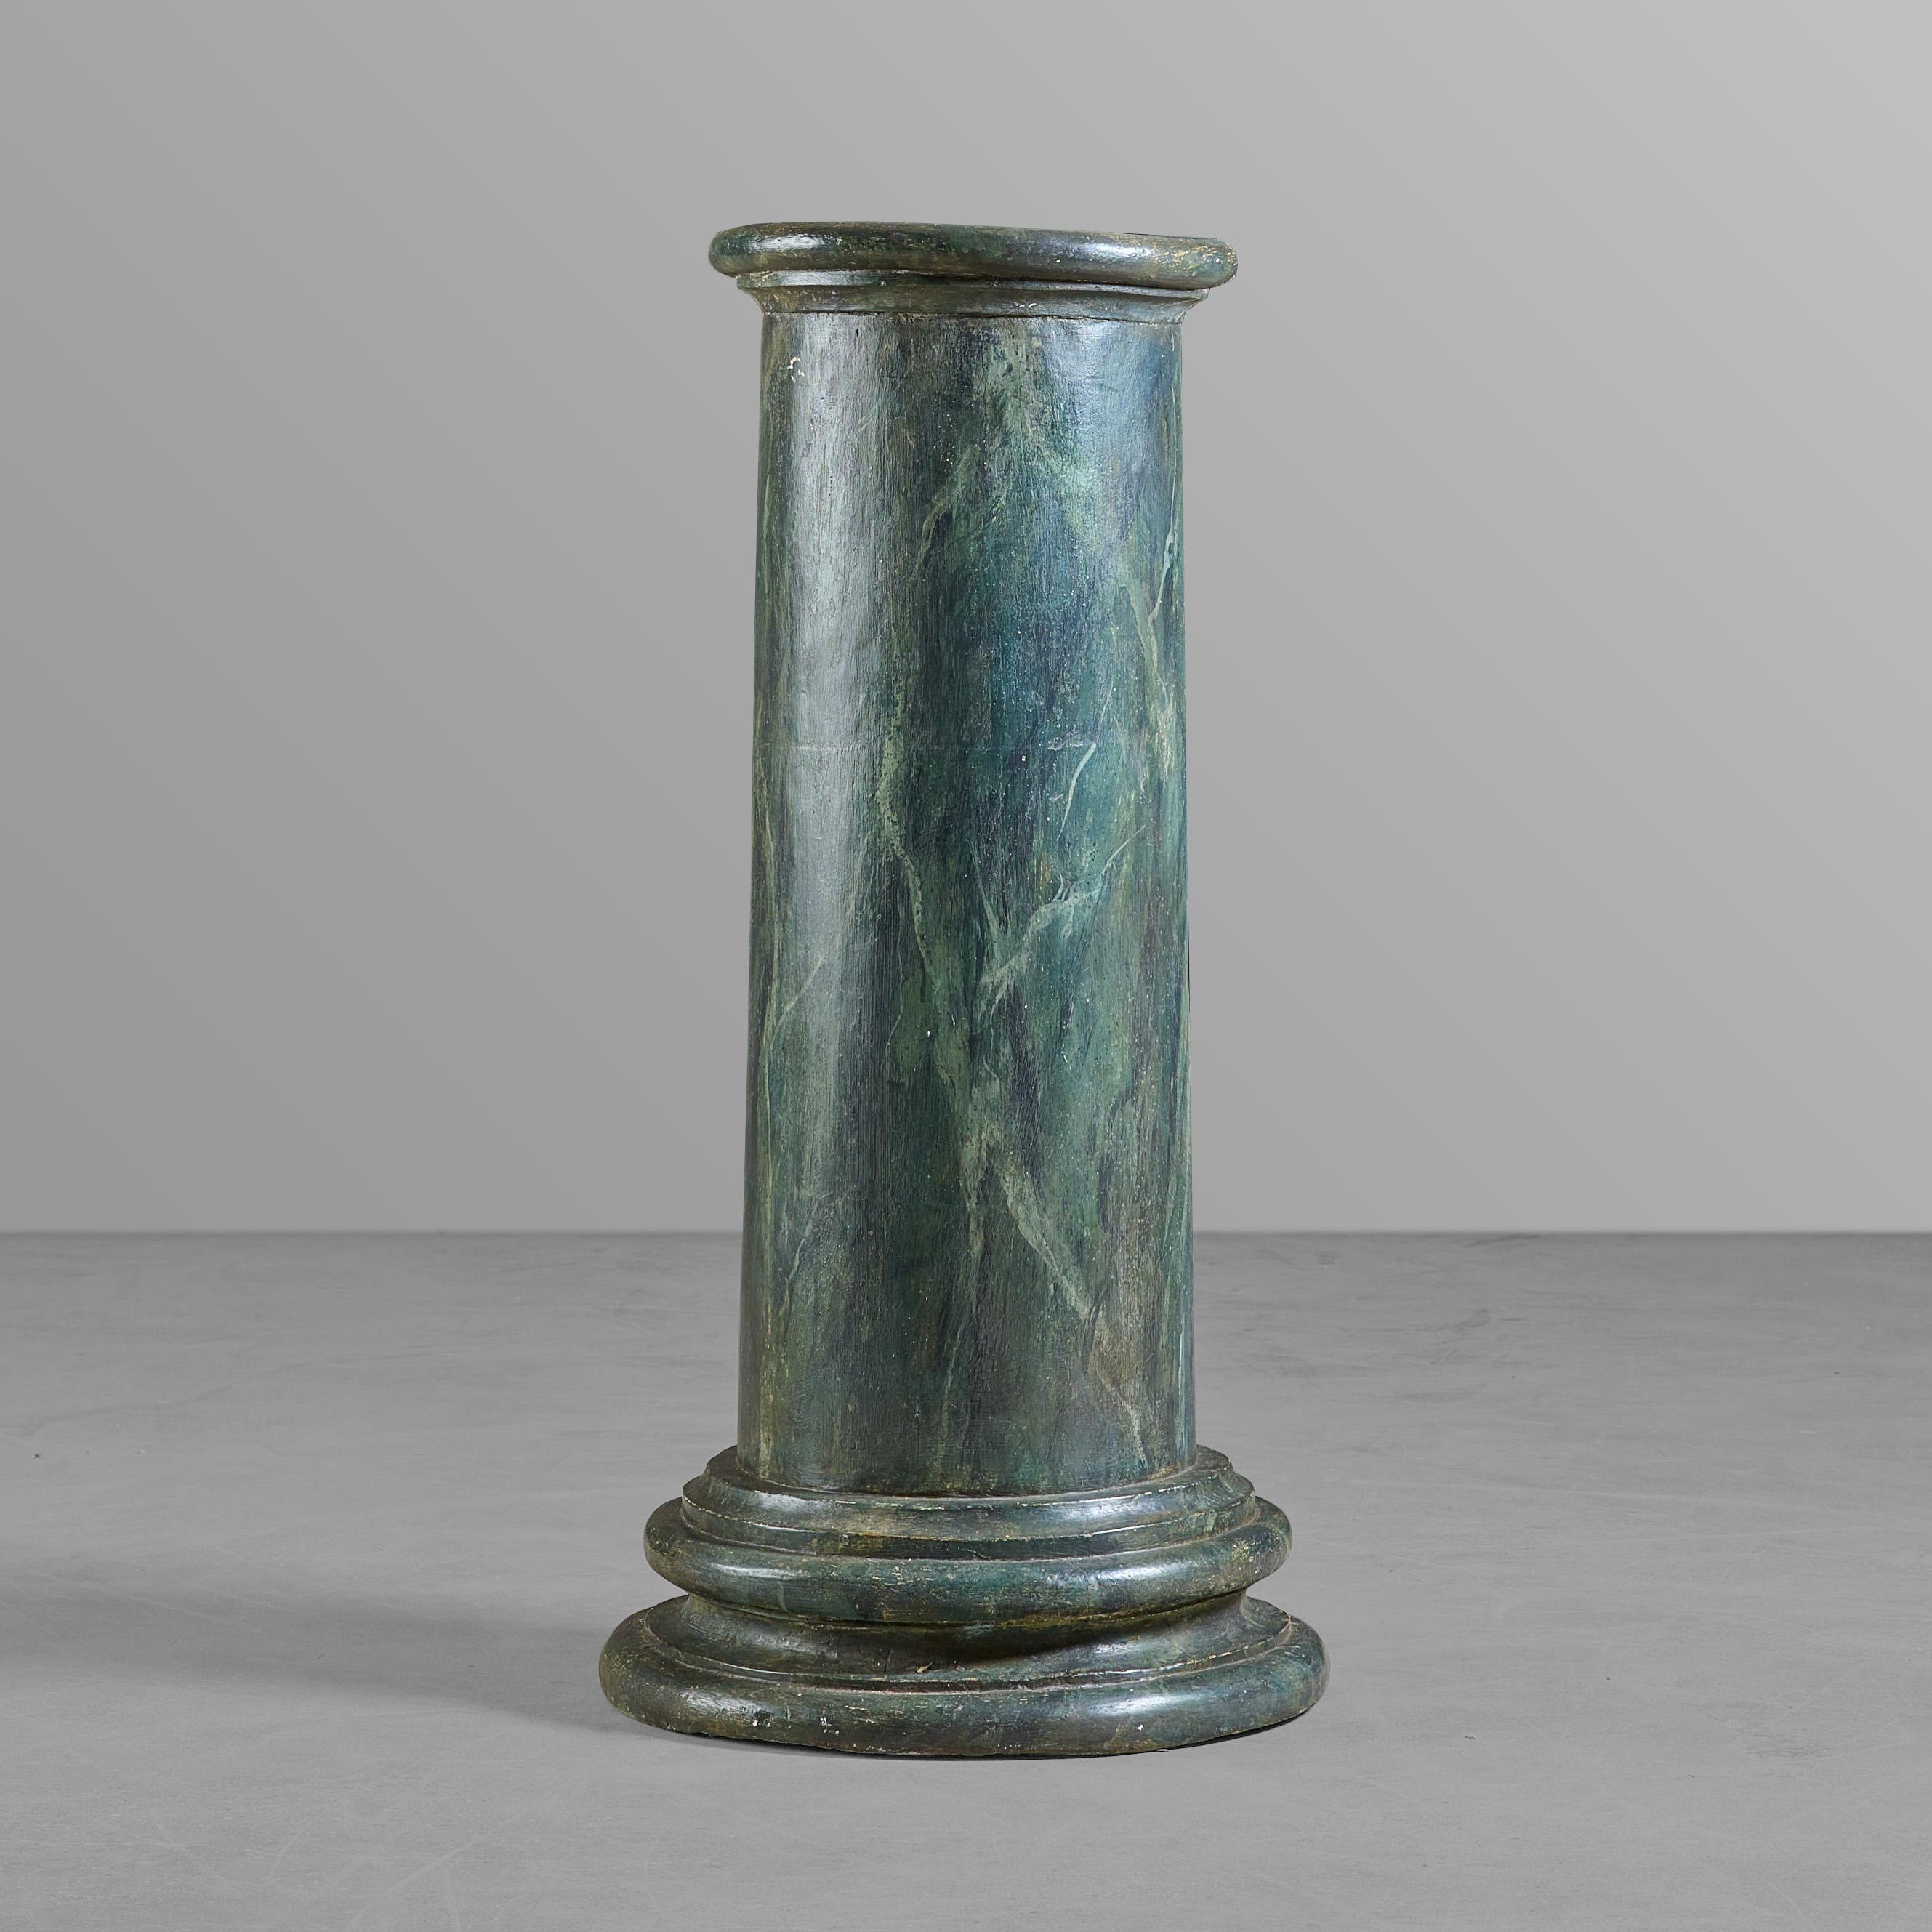 Pair of classic painted pedestals. Wonderful faux marble patina.

